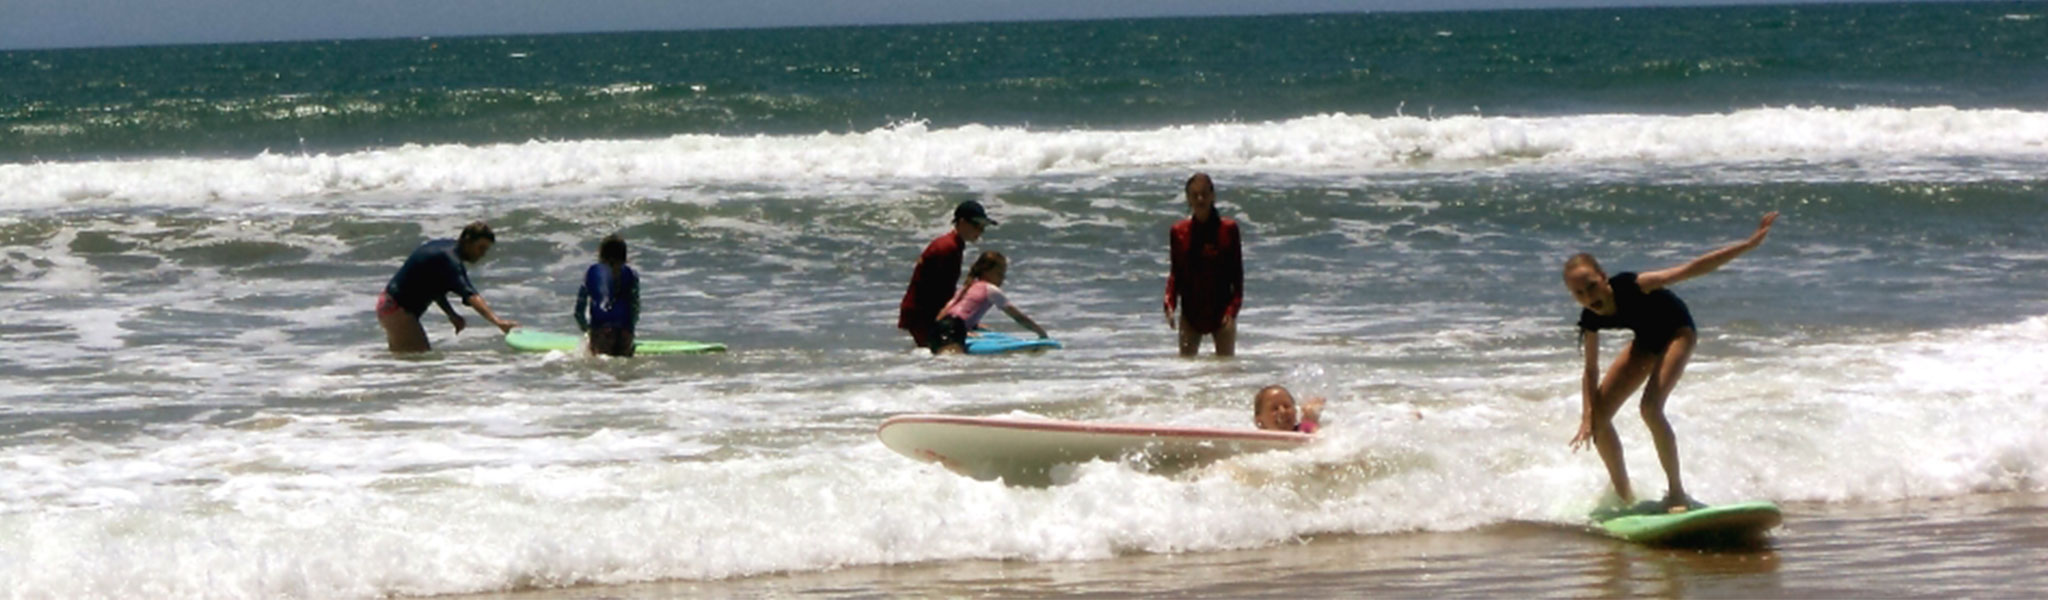 Mapleton State School students surfing at the beach